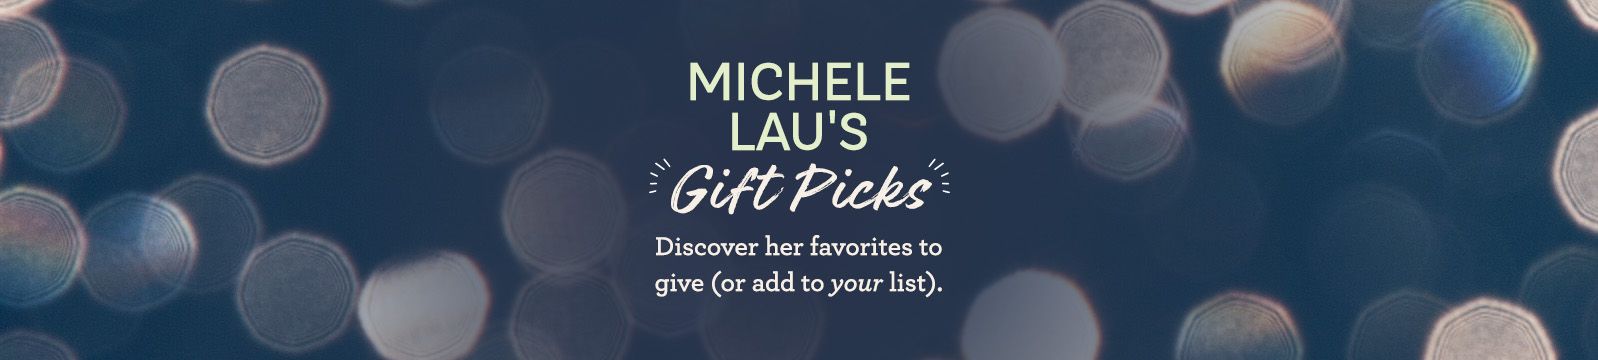 Michele Lau's Gift Picks.  Discover her favorites to give (or add to your list).